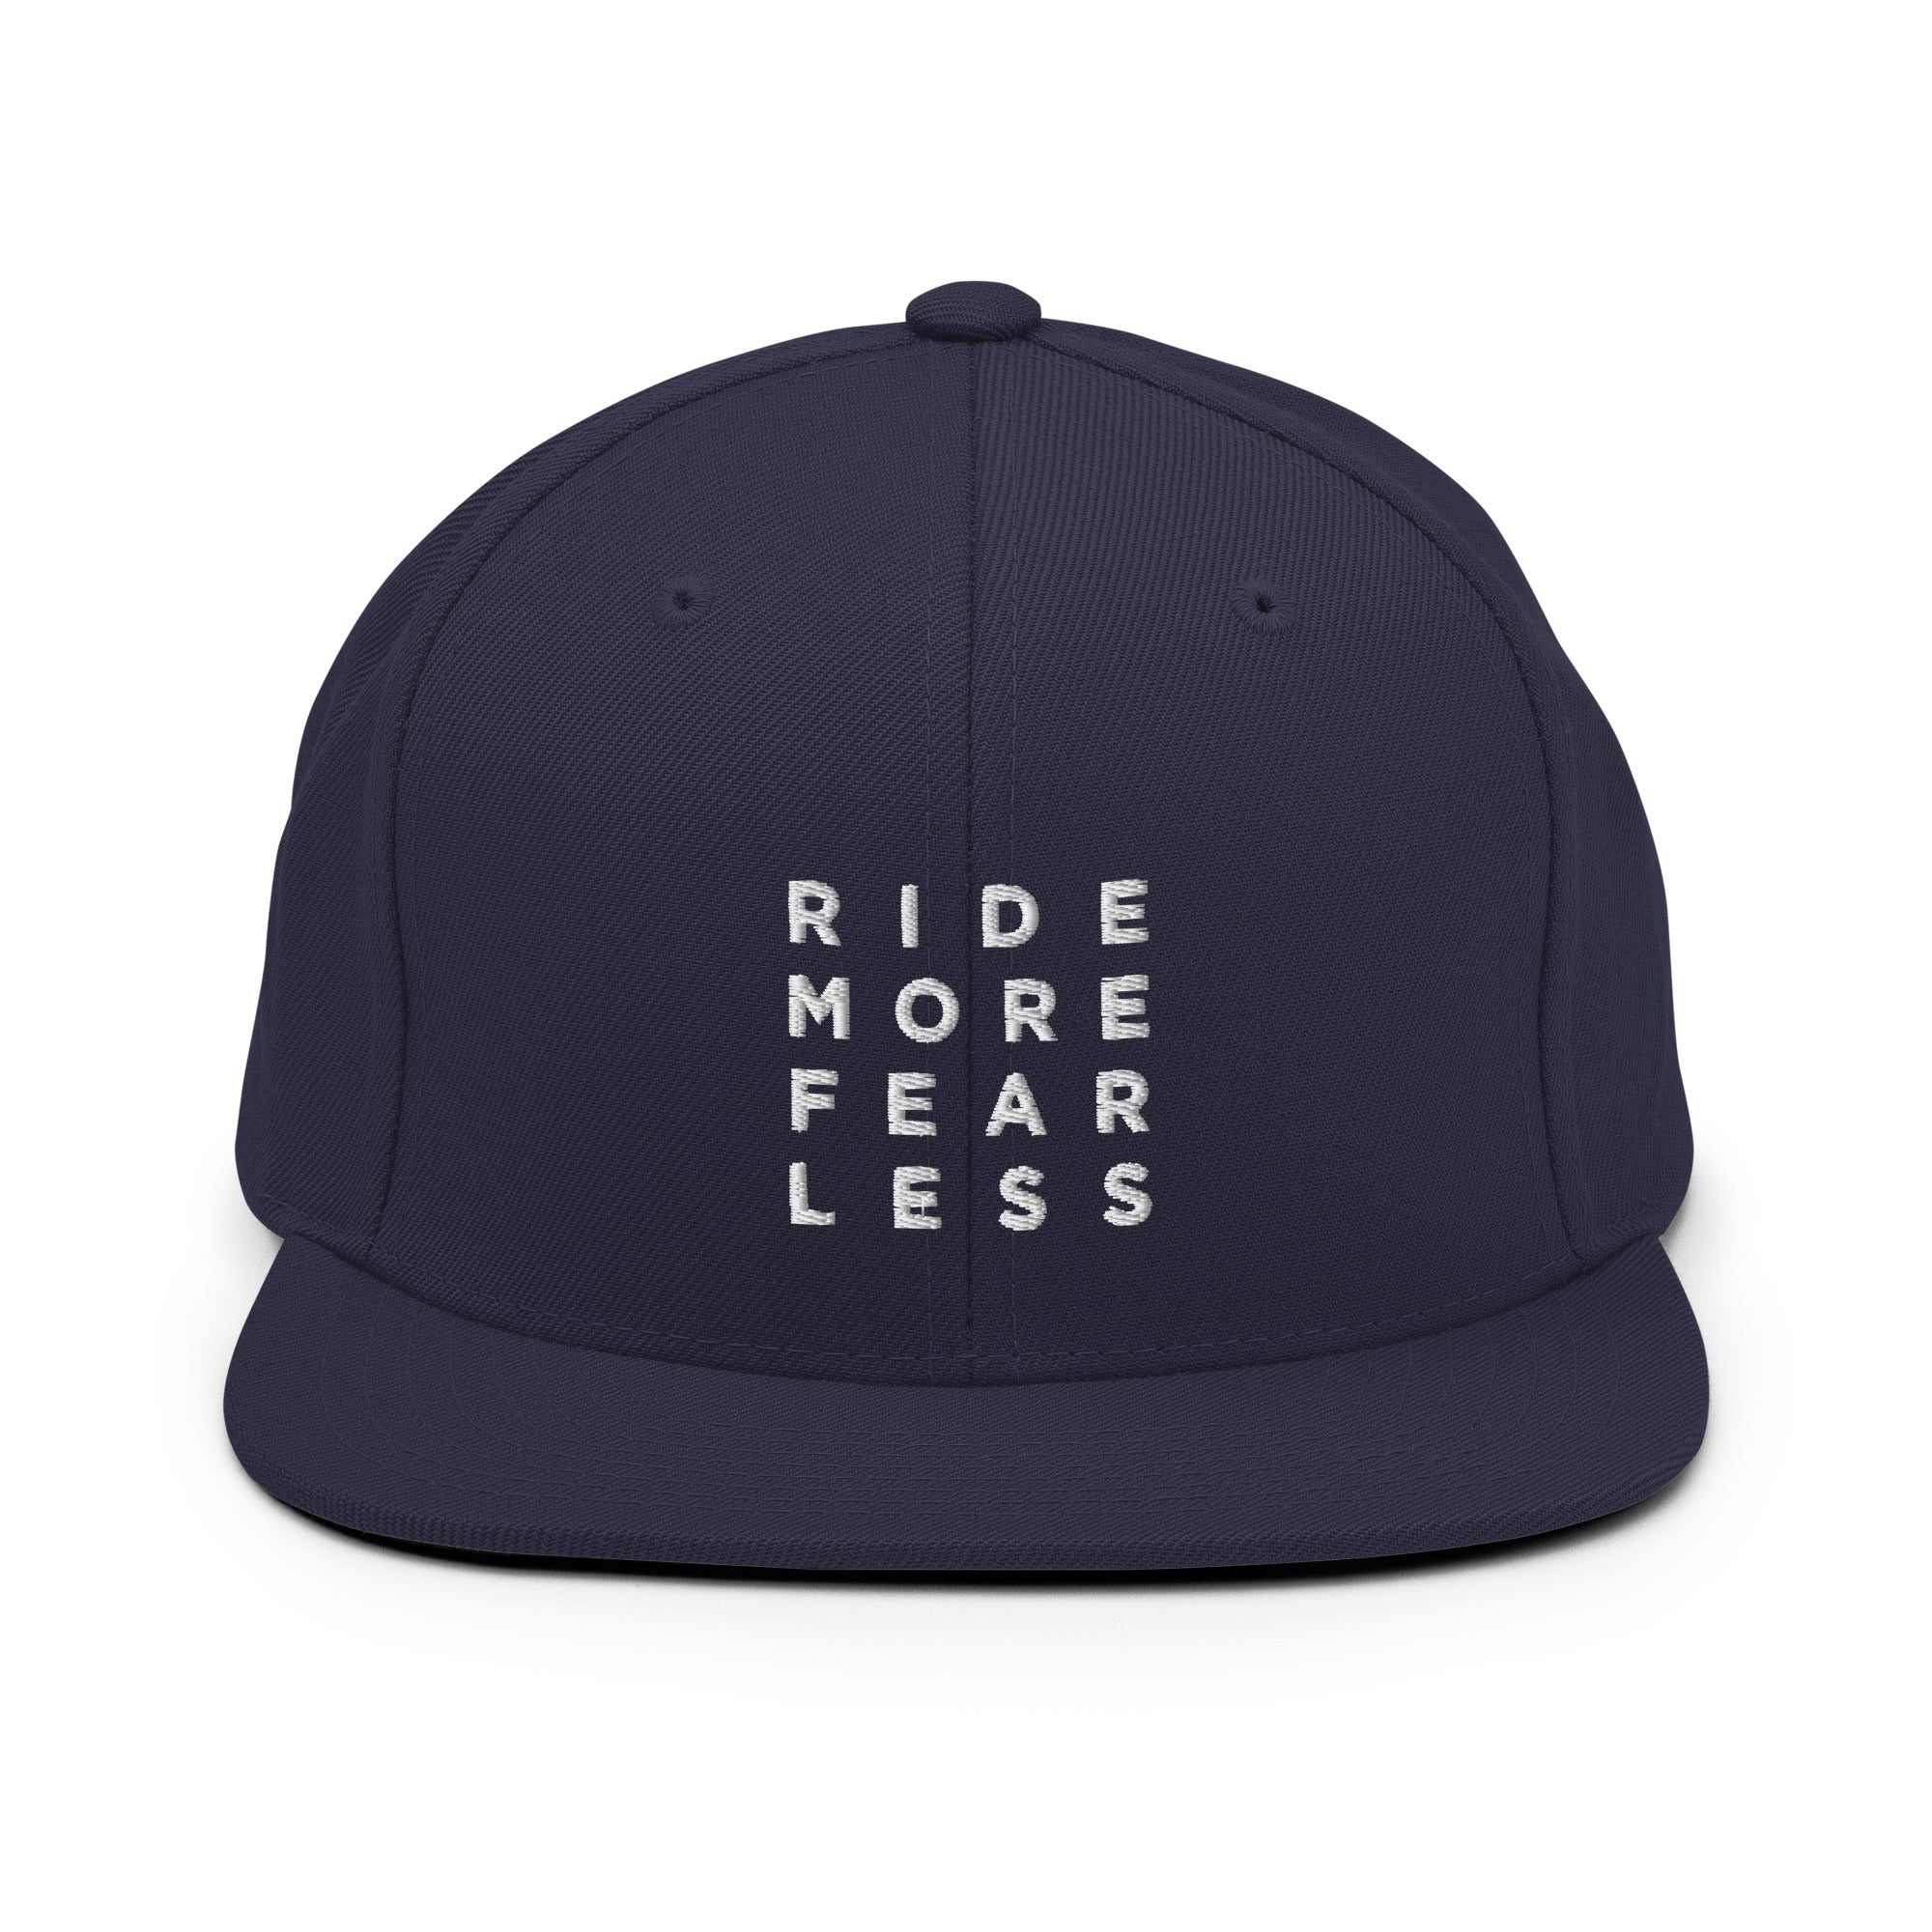 Ride More Fear Less Snapback Hat